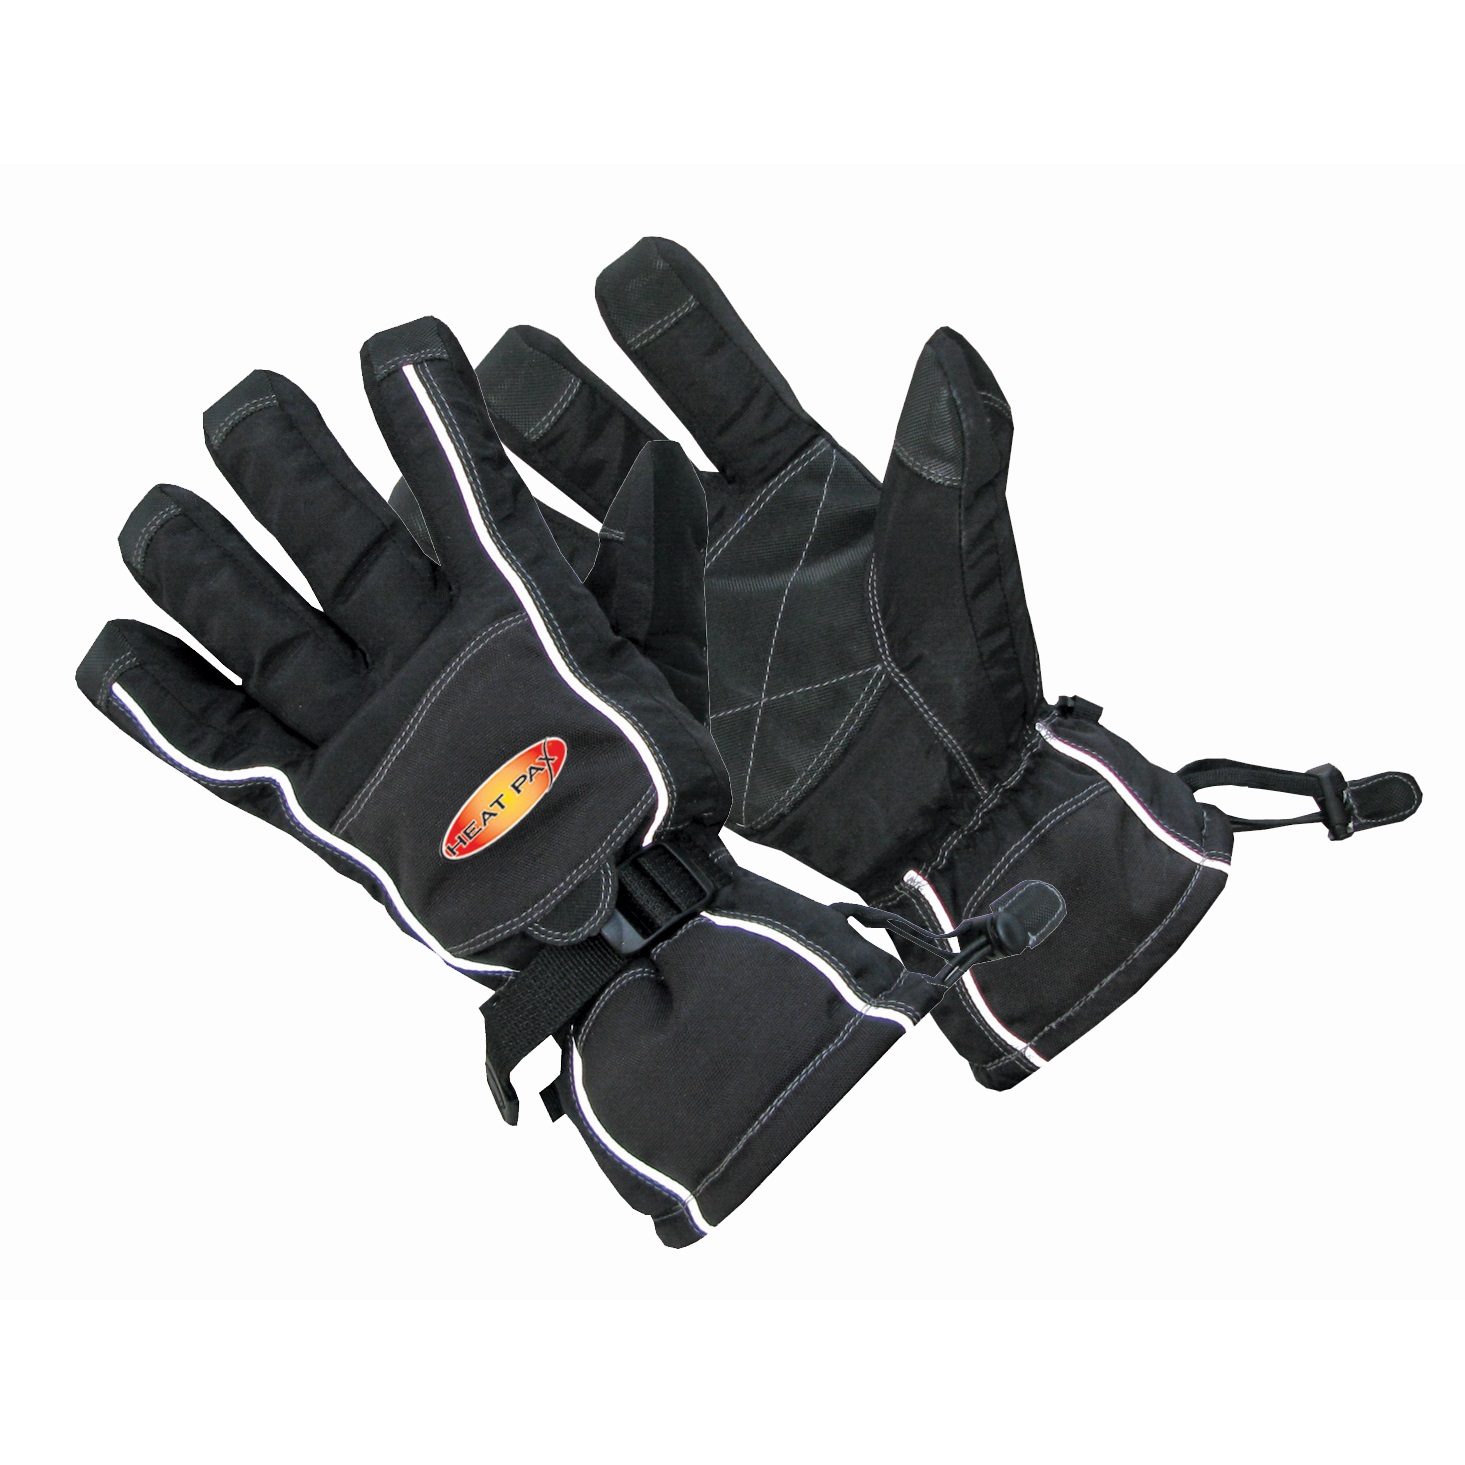 ThermaFur&trade; Air Activated Heating Sports Gloves